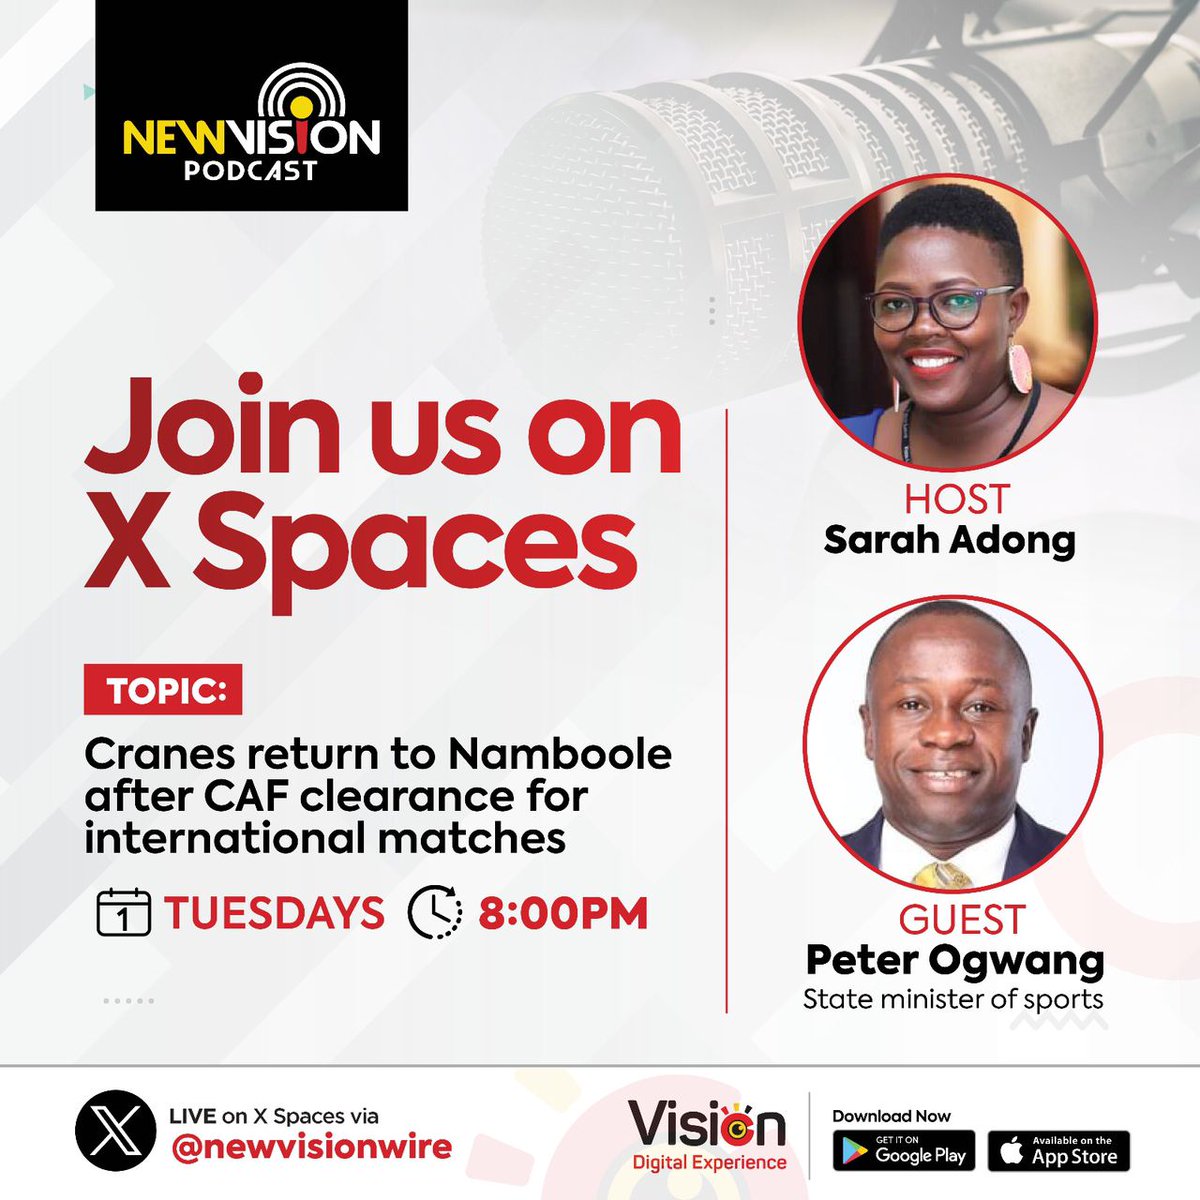 I will be part of today's X Spaces hosted by @newvisionwire to discuss the future of Uganda’s sports following @CAF_Online clearance on Namboole. Catch you at 8pm!